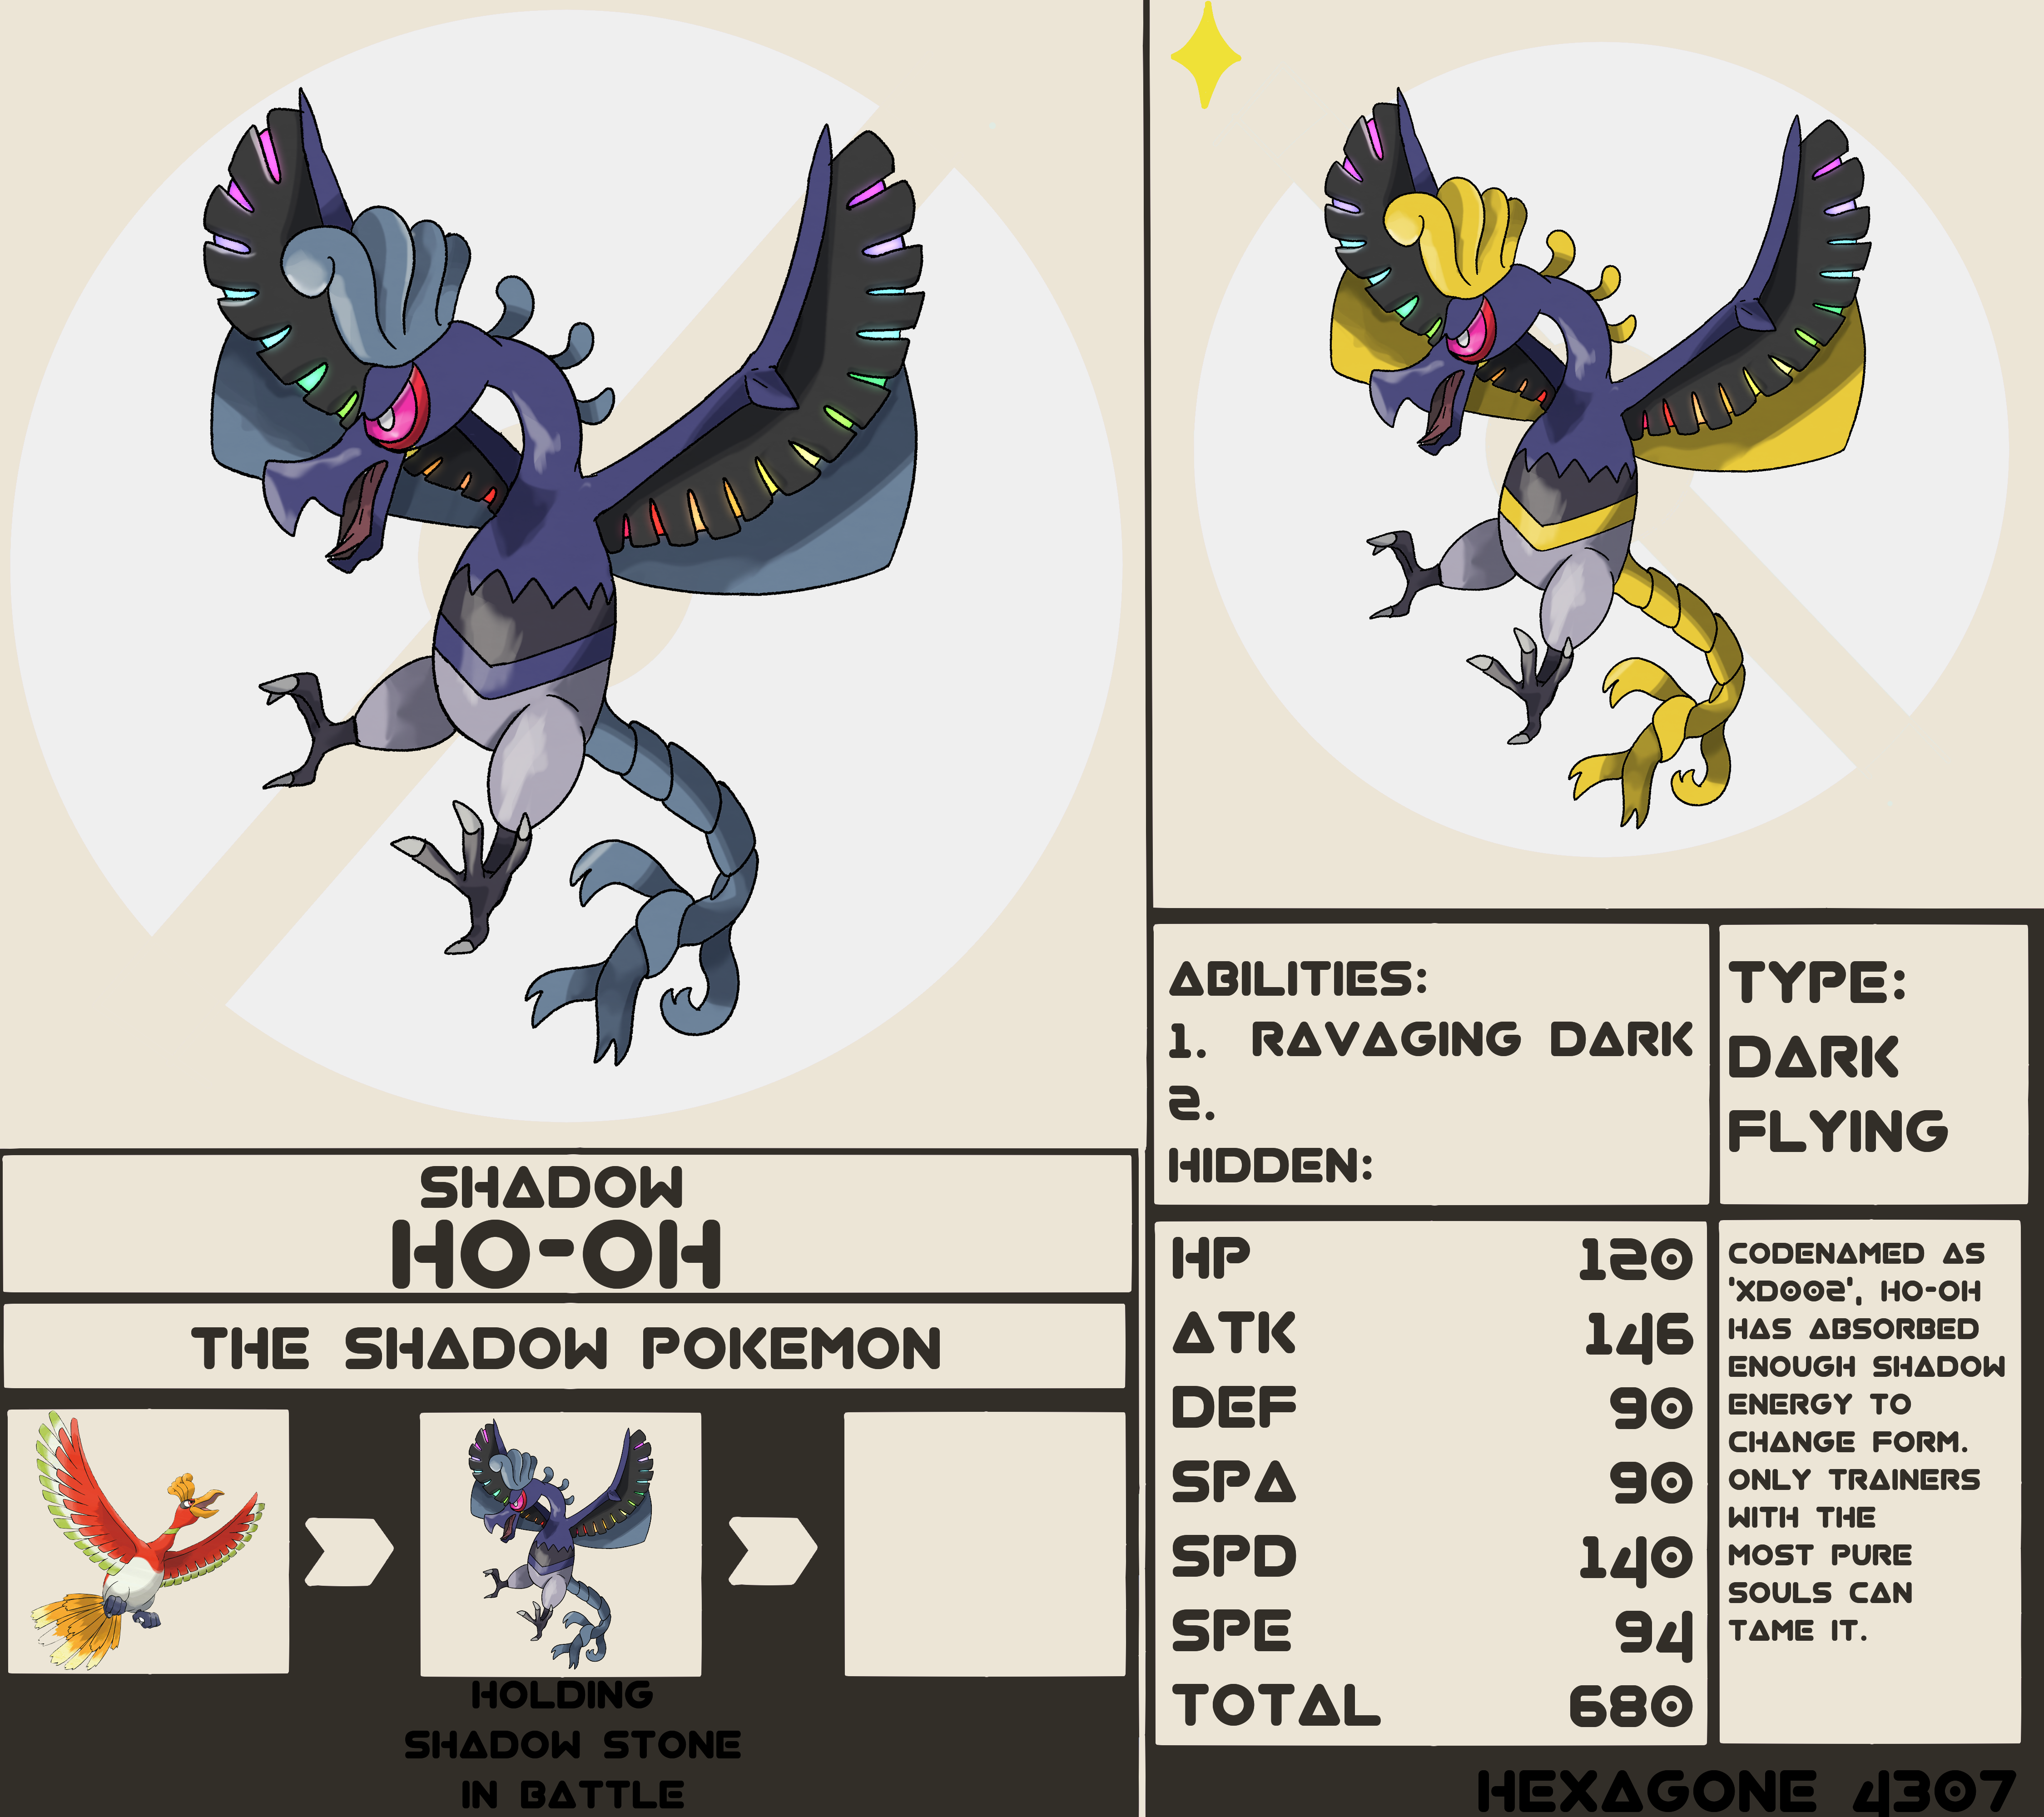 XD002-SHADOW HO-OH.png